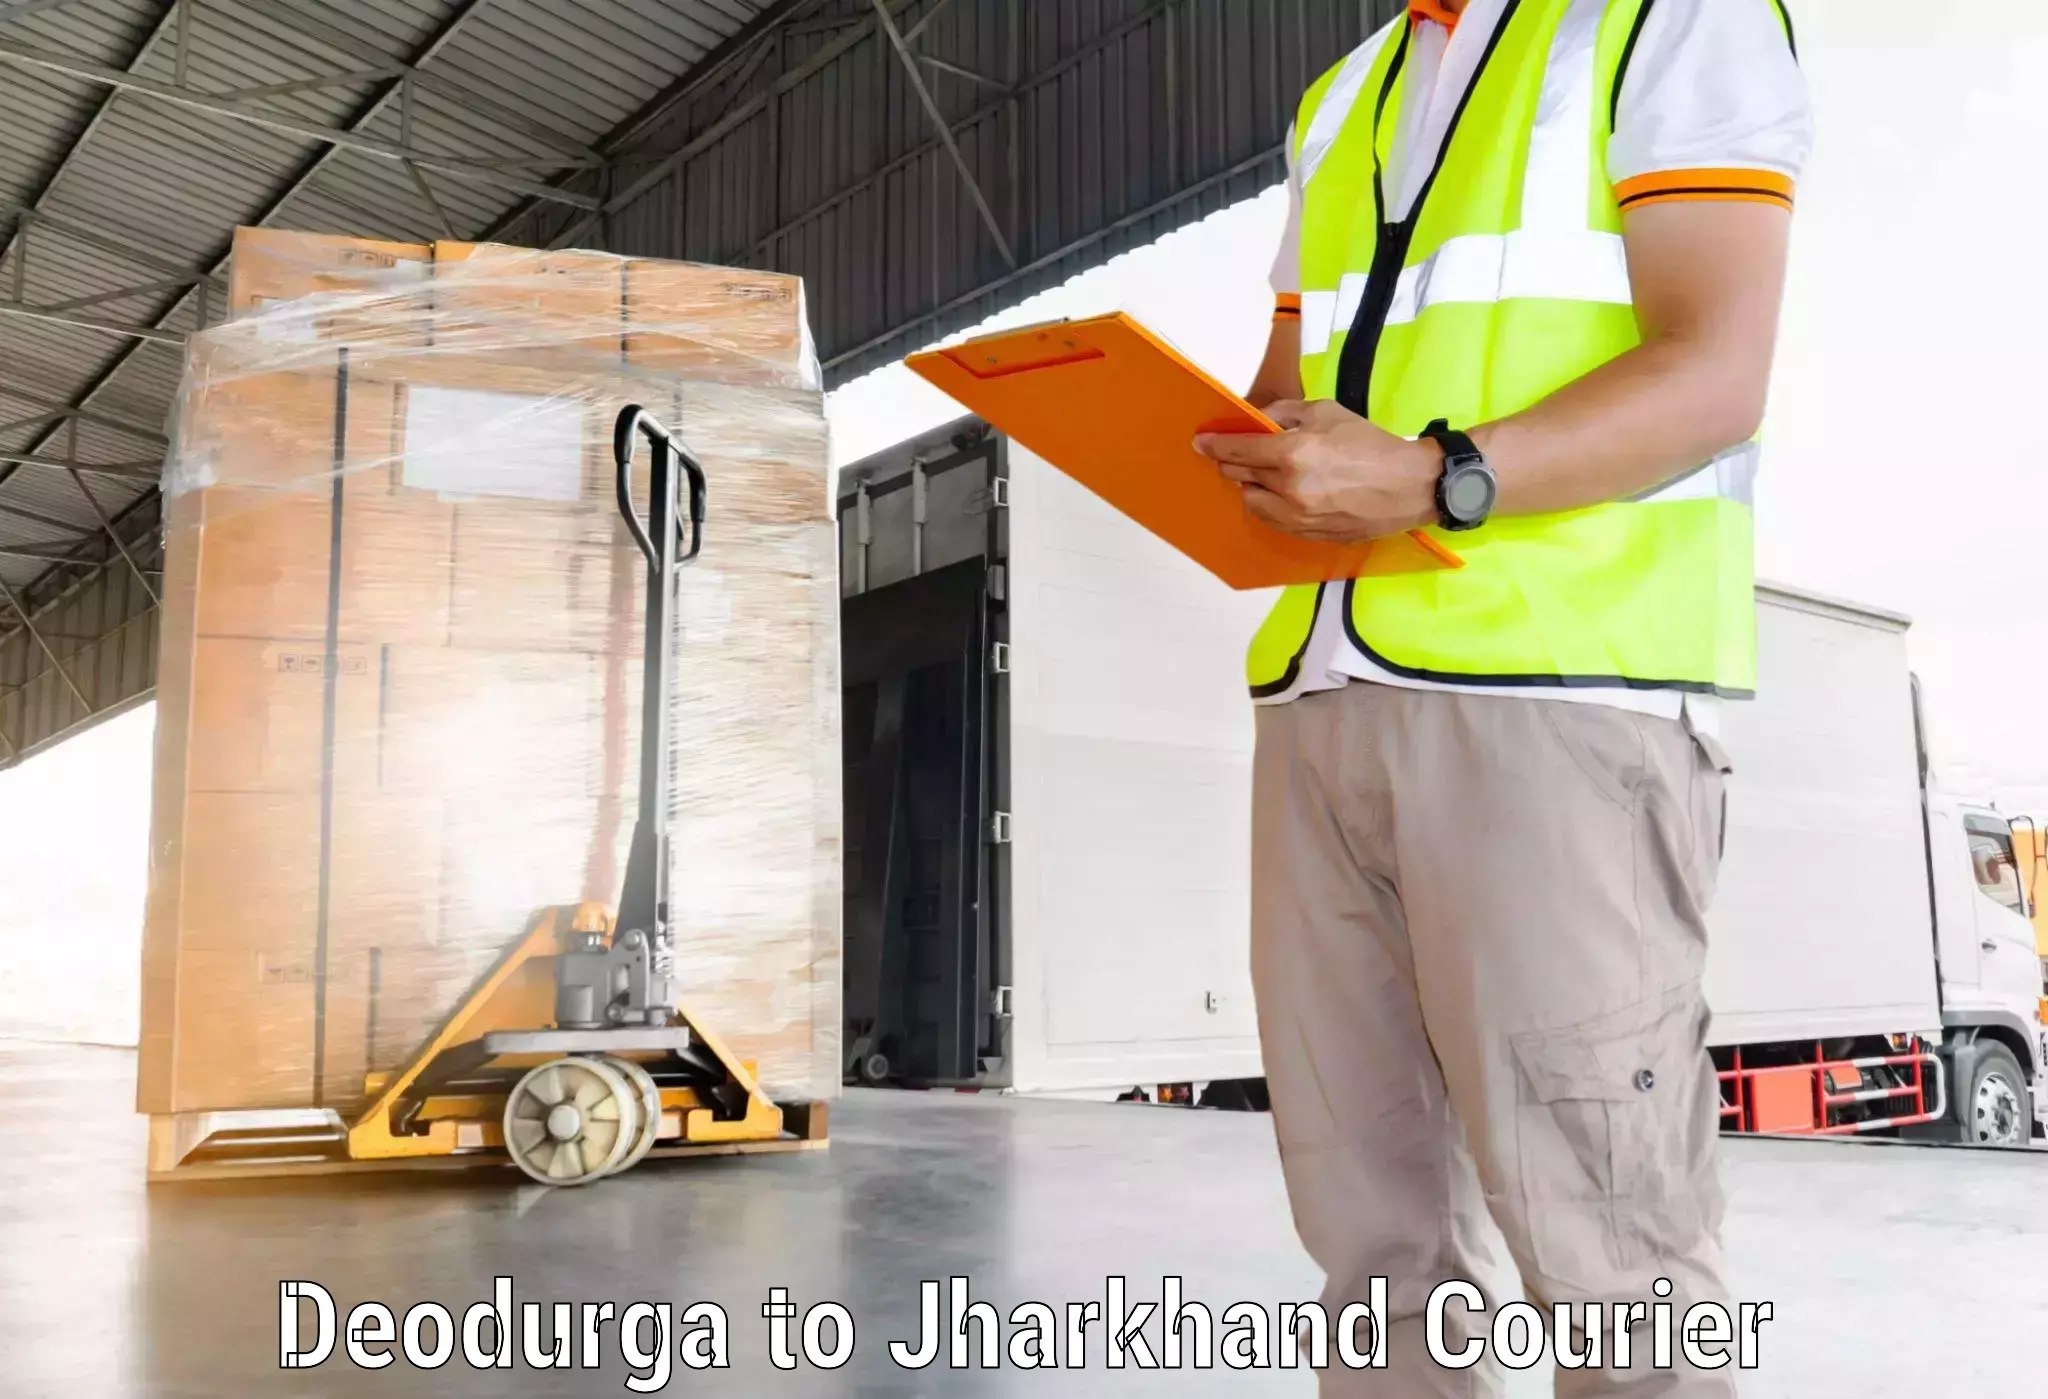 Speedy delivery service in Deodurga to Domchanch